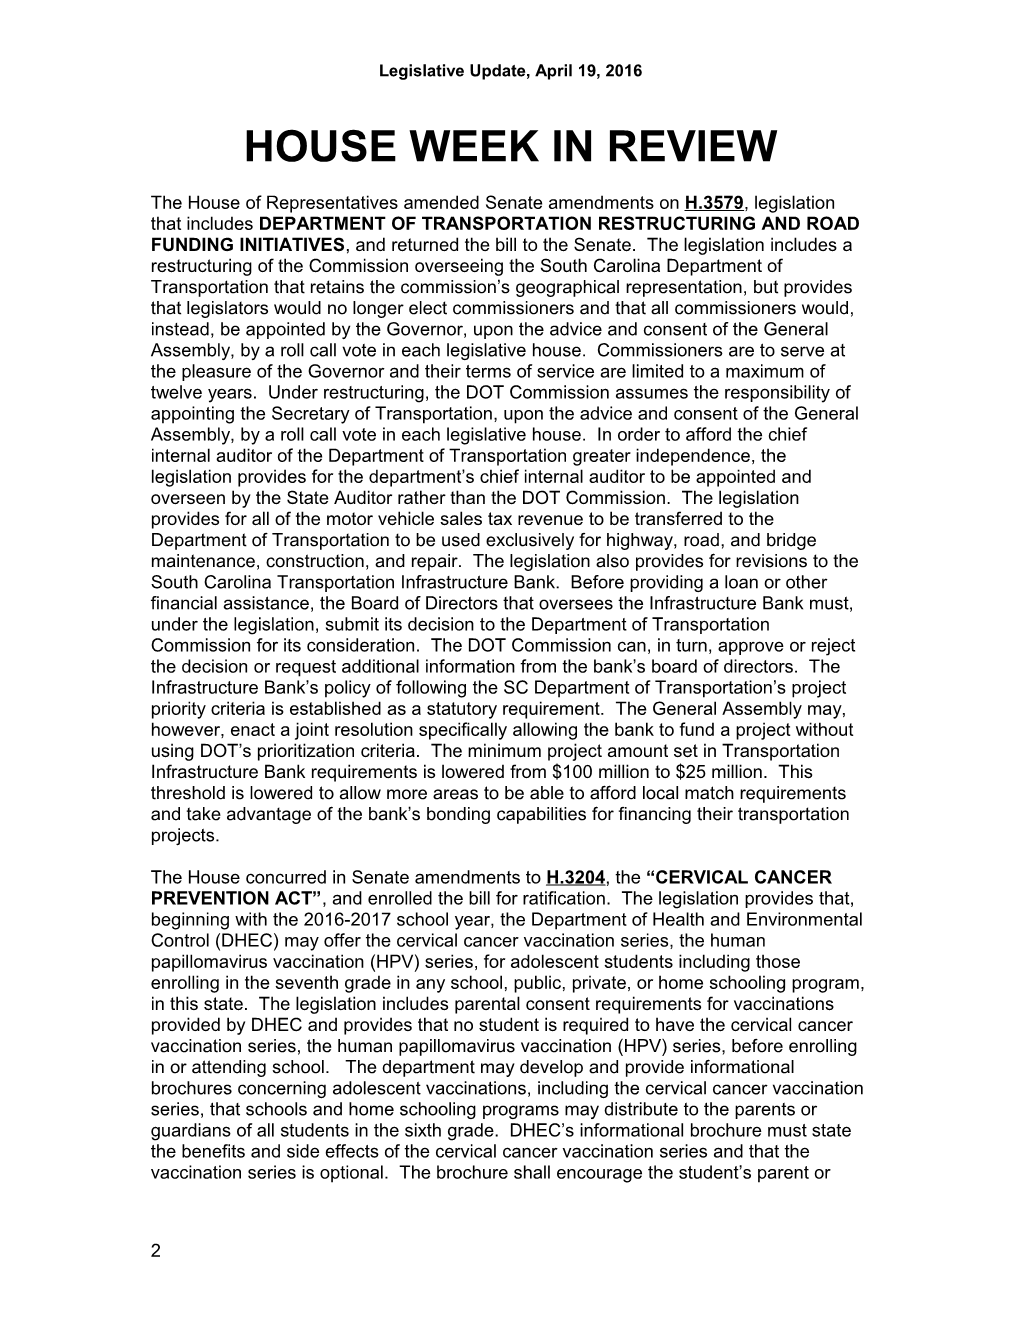 Bills Introduced in the House This Week 10